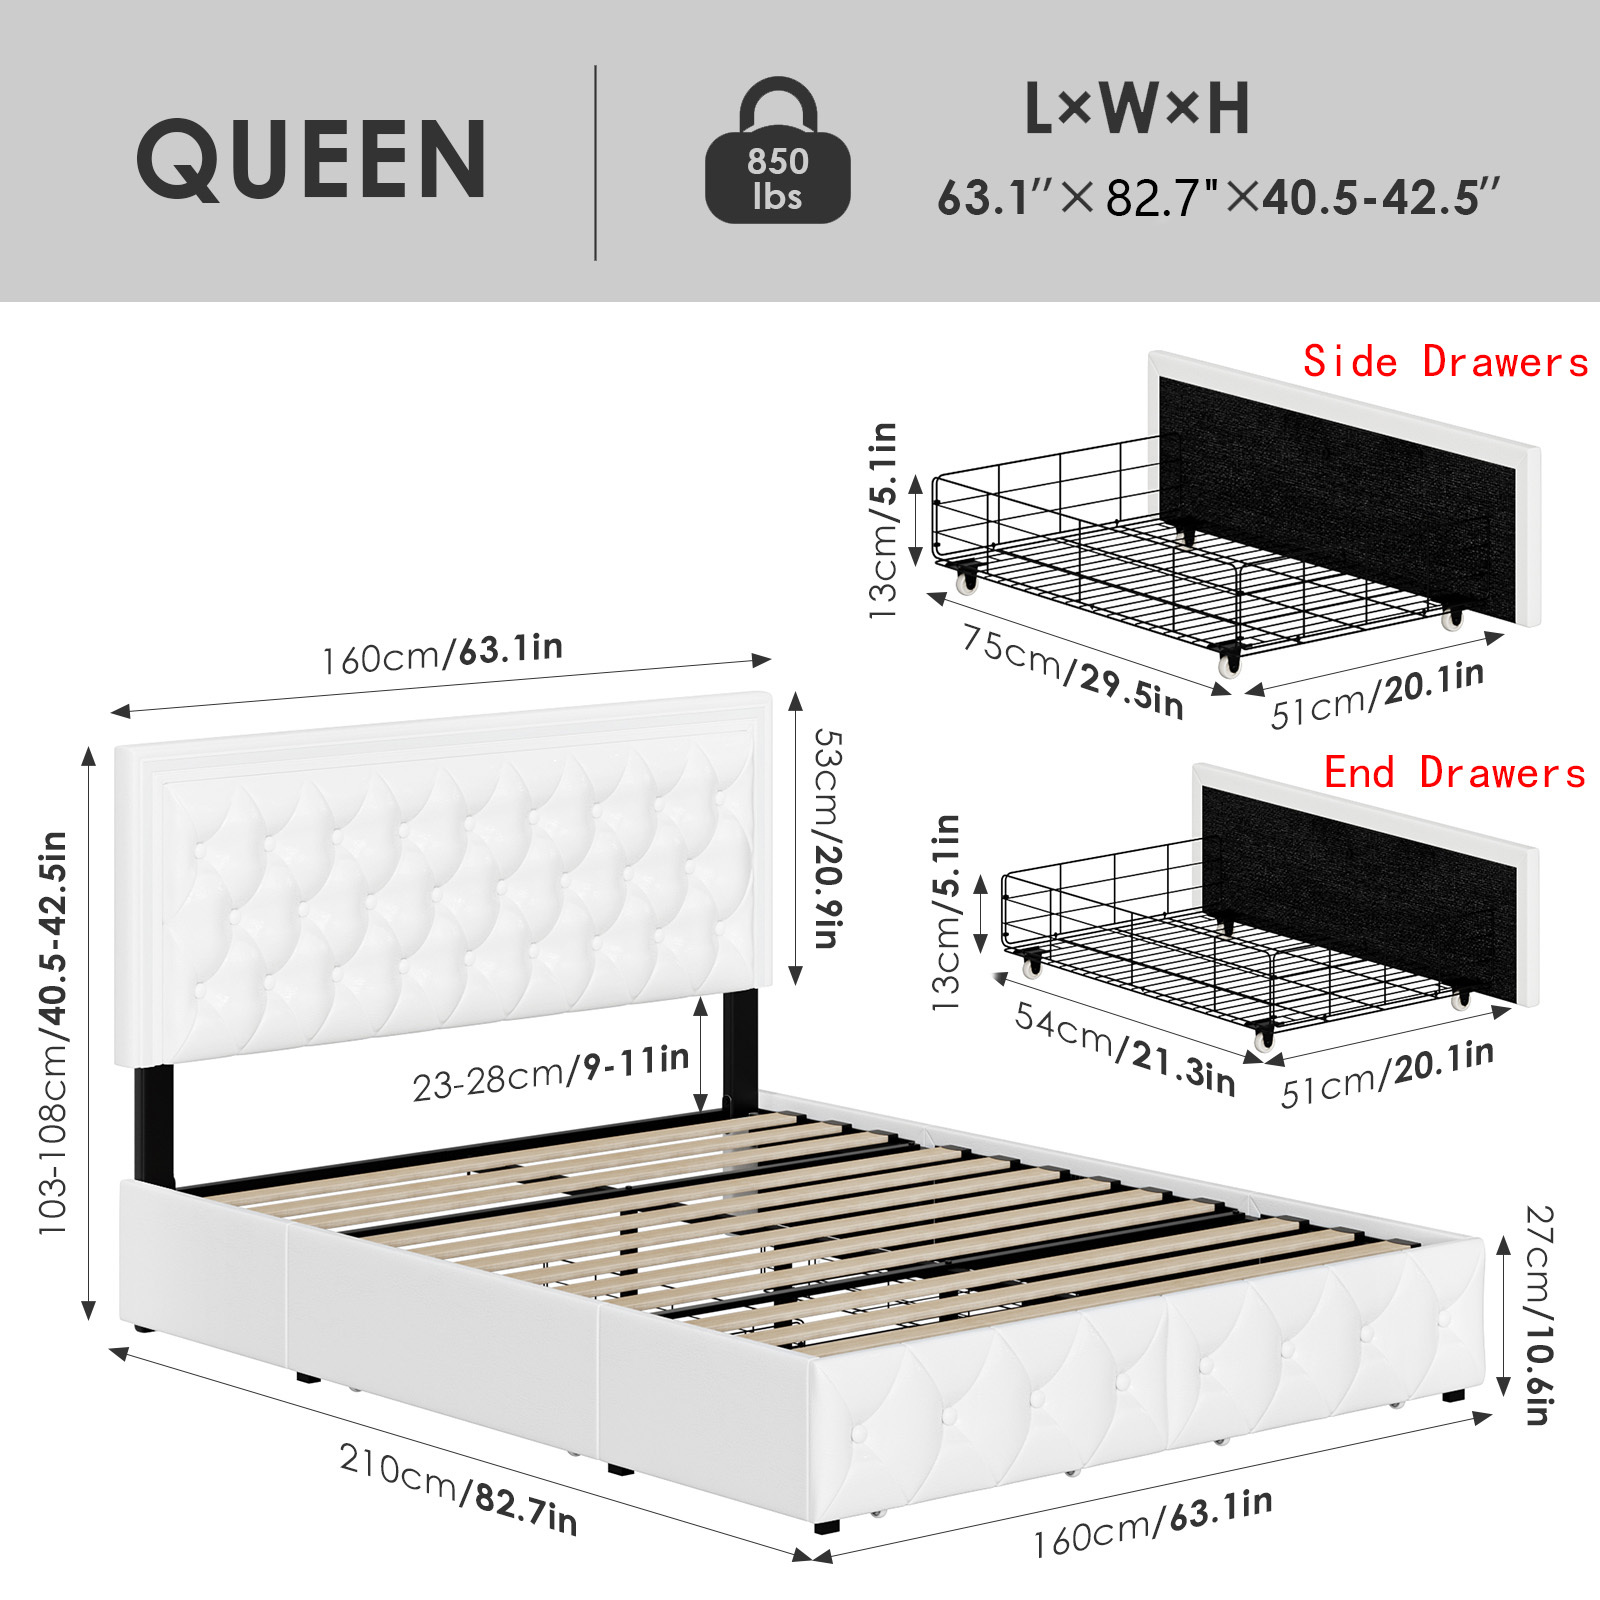 Homfa Queen LED Bed, 9 Colors LED Lights Platform Bed Frame with 4 Storage Drawers, Adjustable Upholstered Headboard with Button Tufted, PU White - image 5 of 10